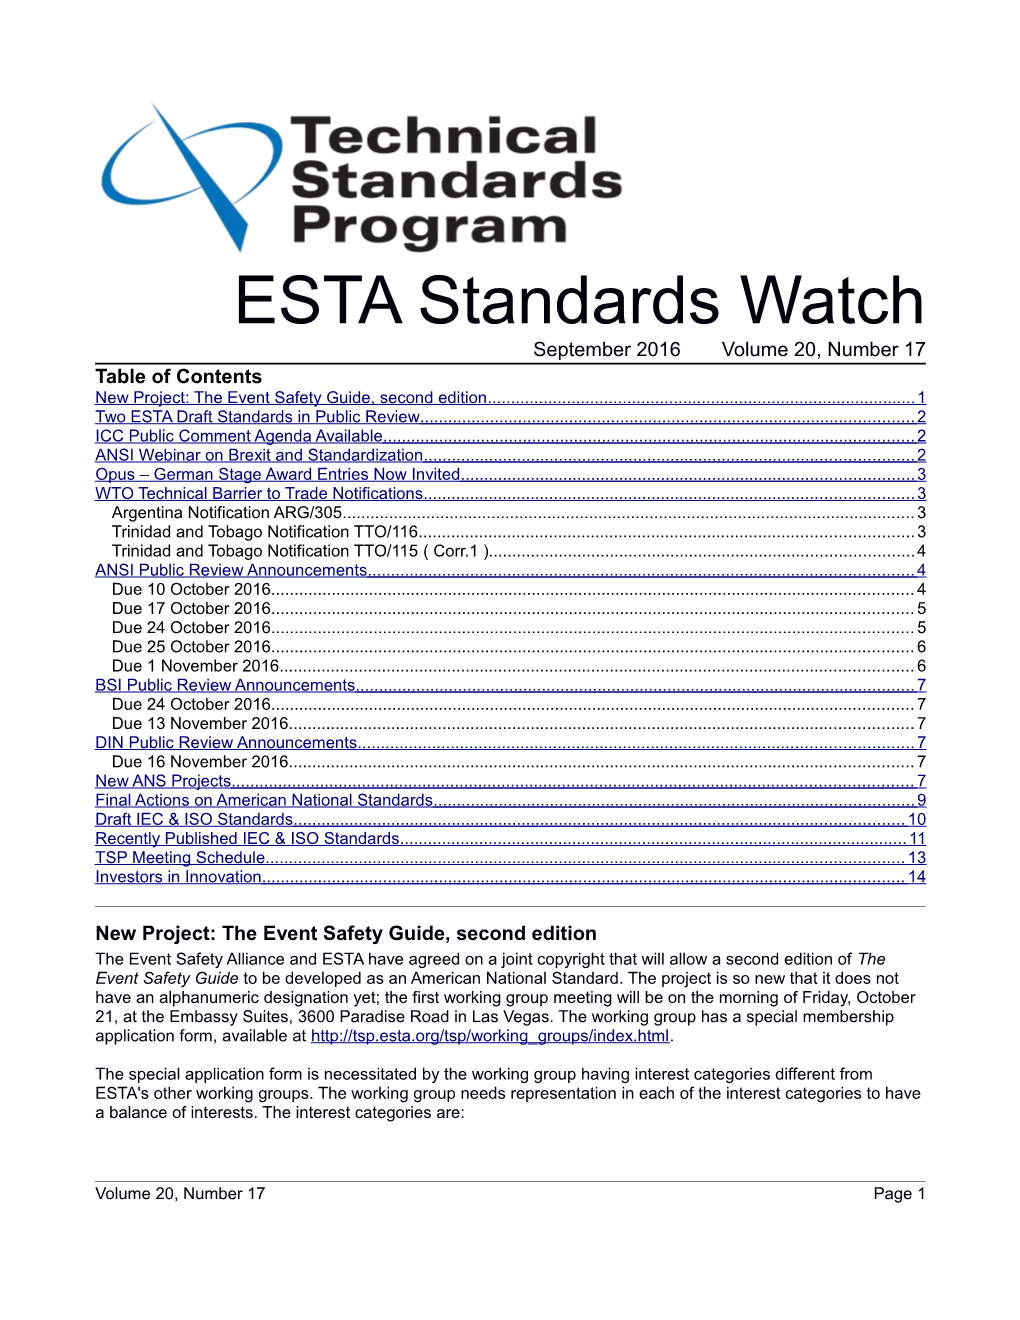 ESTA Standards Watch September 2016 Volume 20, Number 17 Table of Contents New Project: the Event Safety Guide, Second Edition